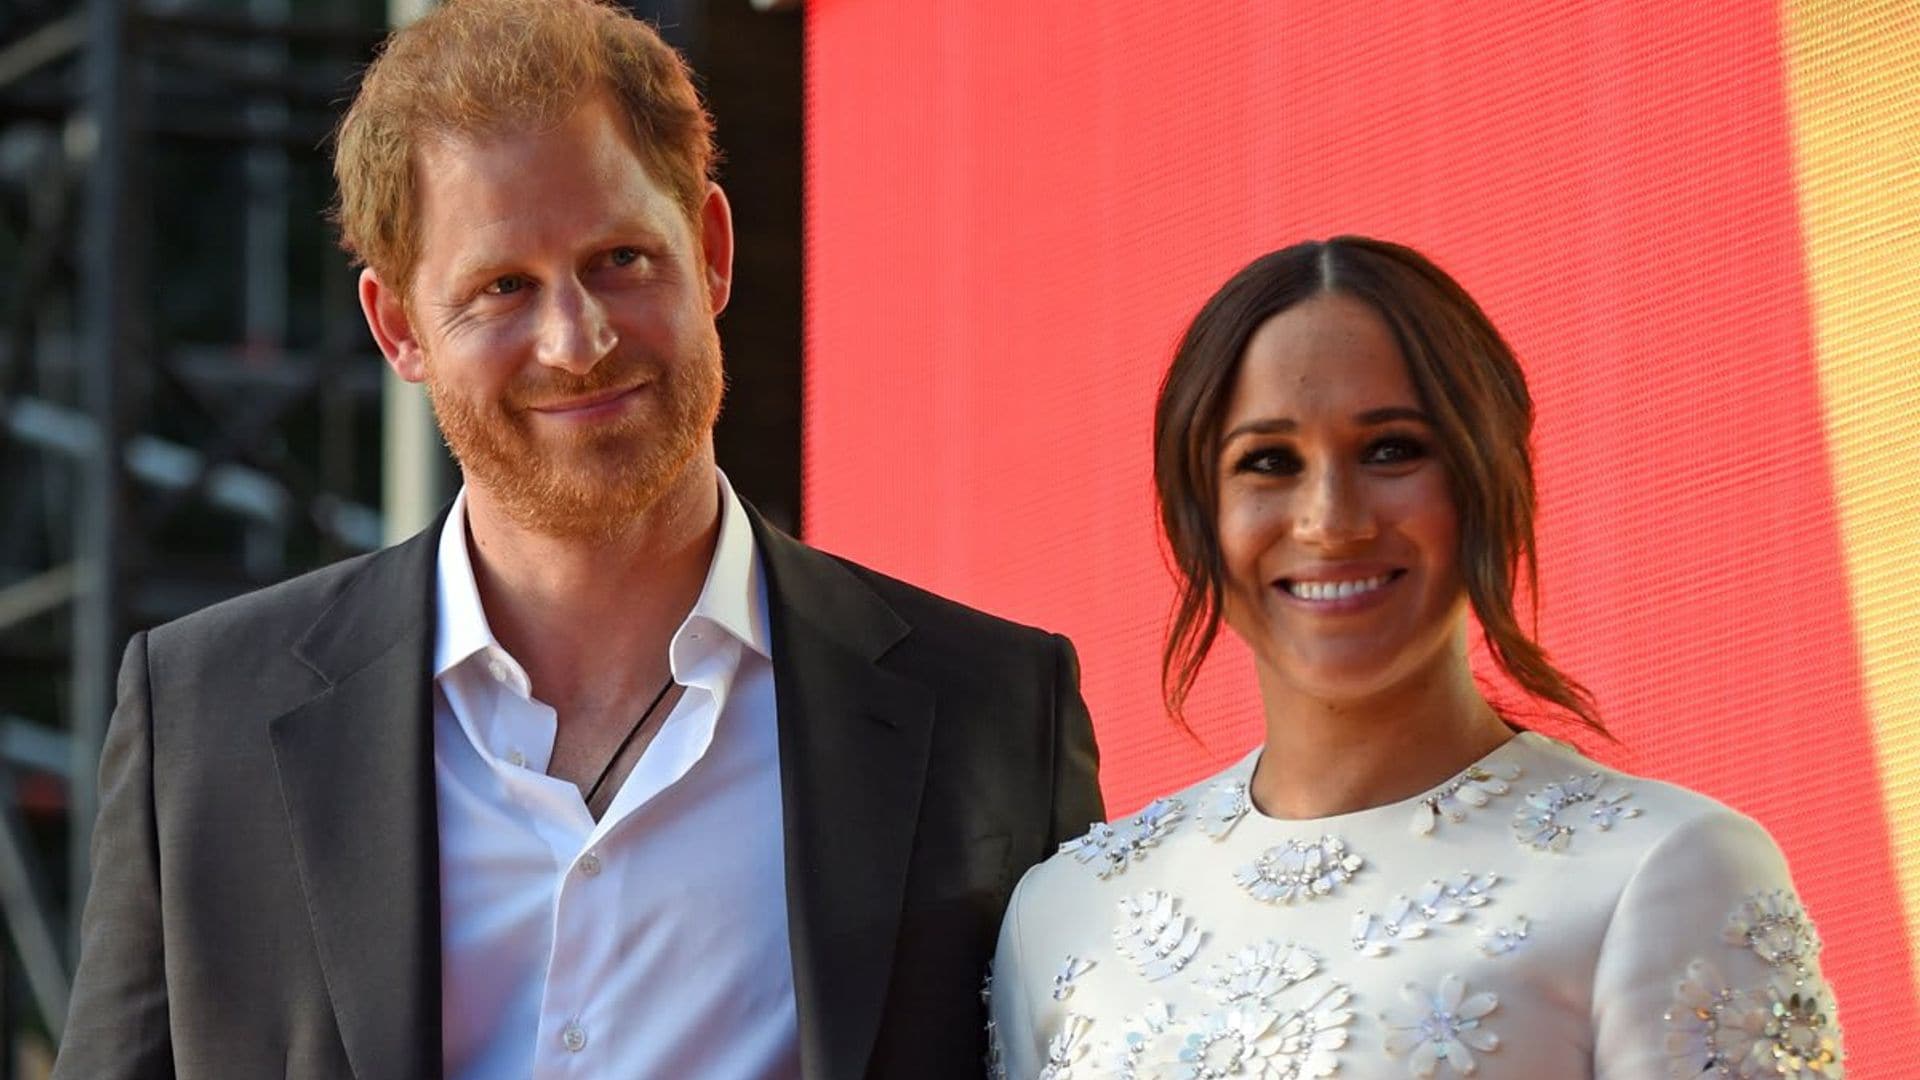 Meghan Markle and Prince Harry have exciting new roles